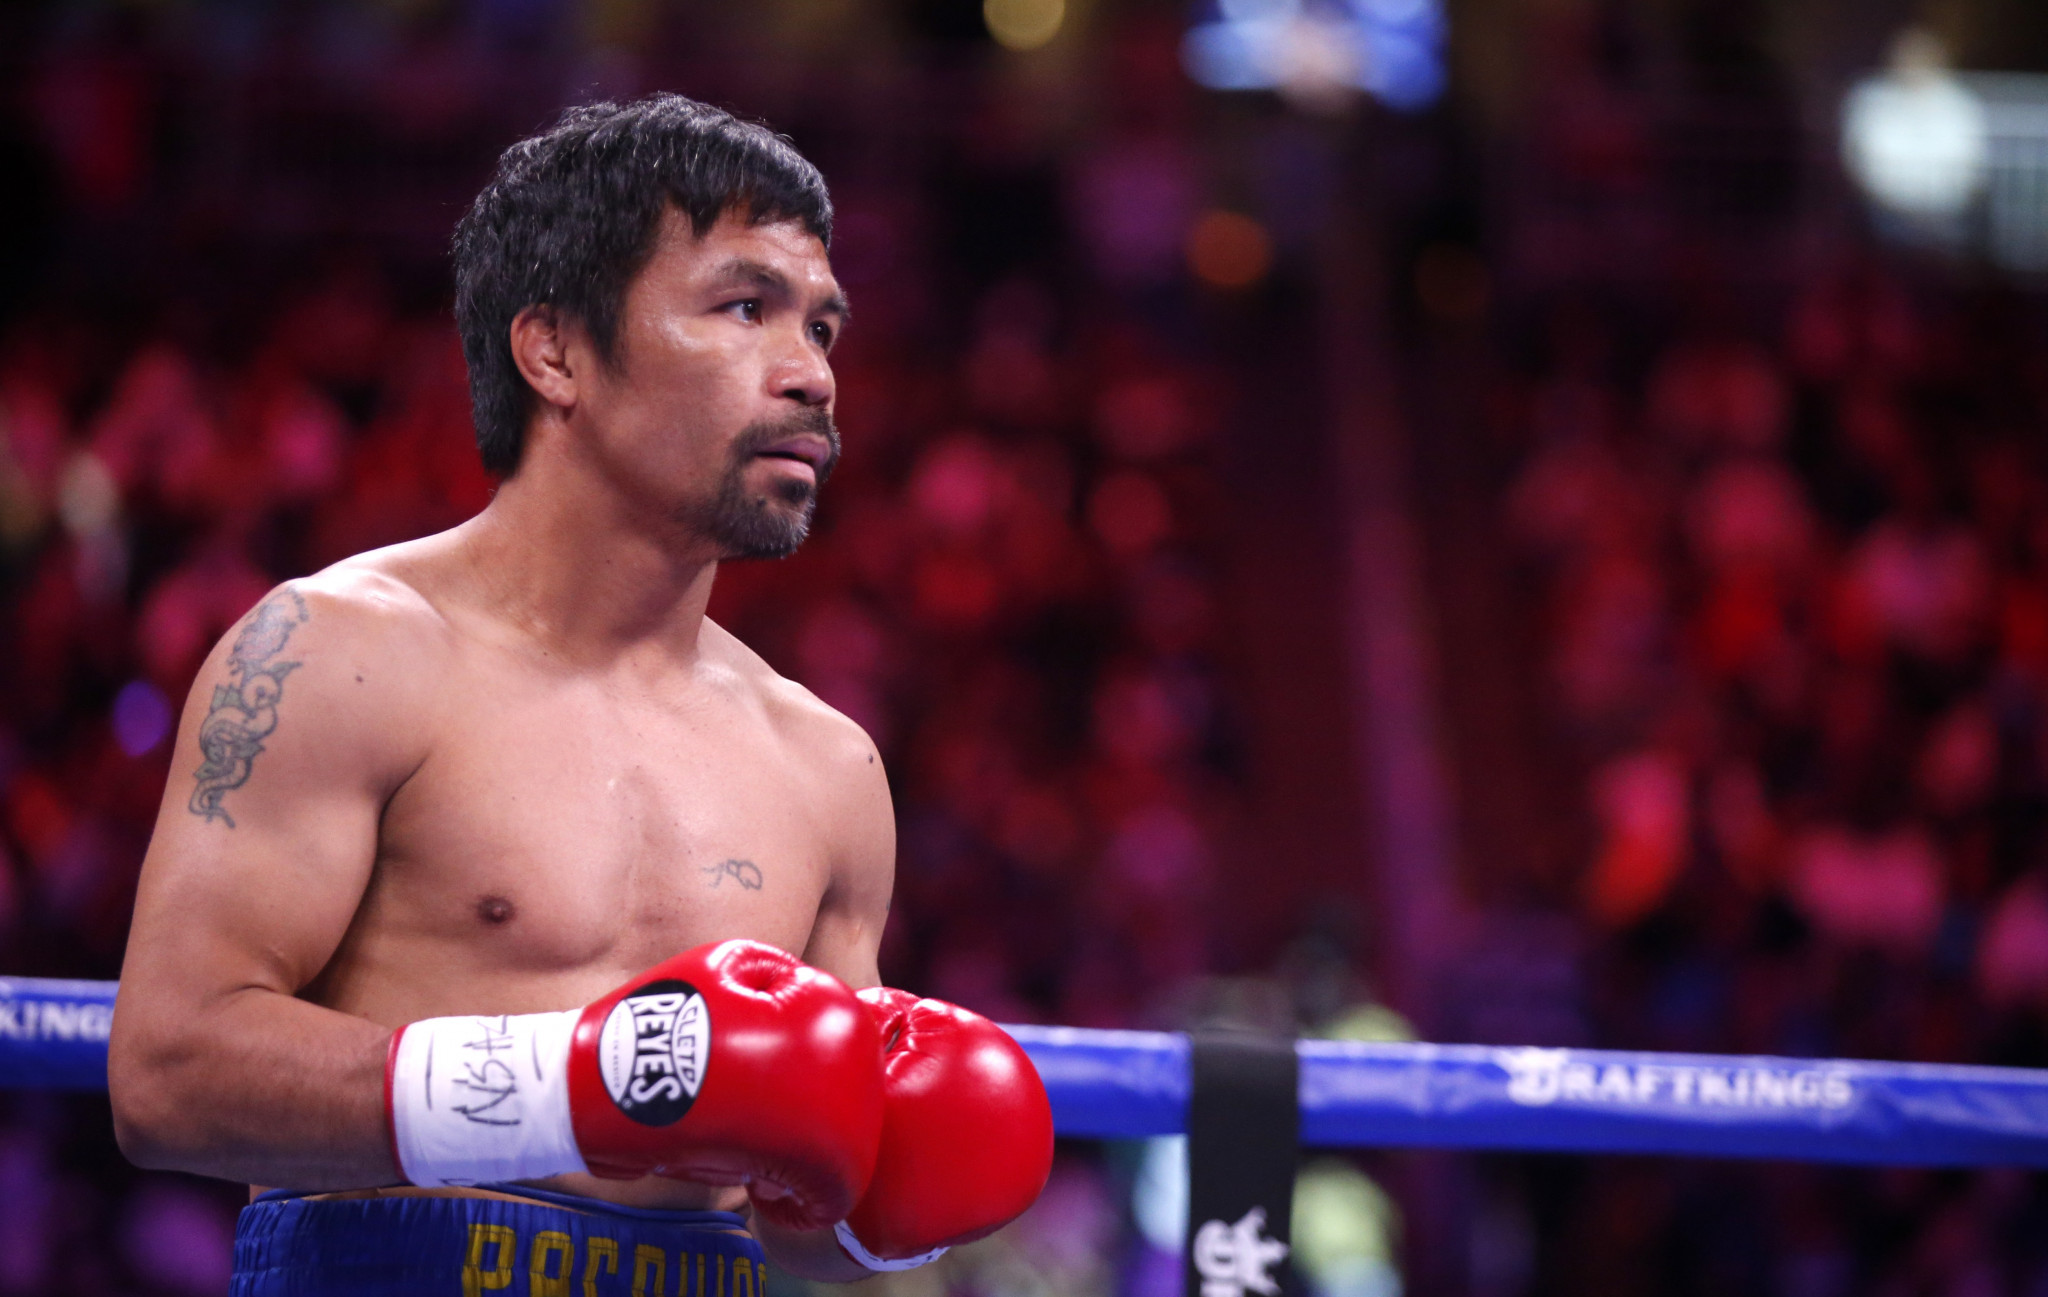 Manny Pacquiao is hoping to make his Olympic debut at Paris 2024 ©Getty Images